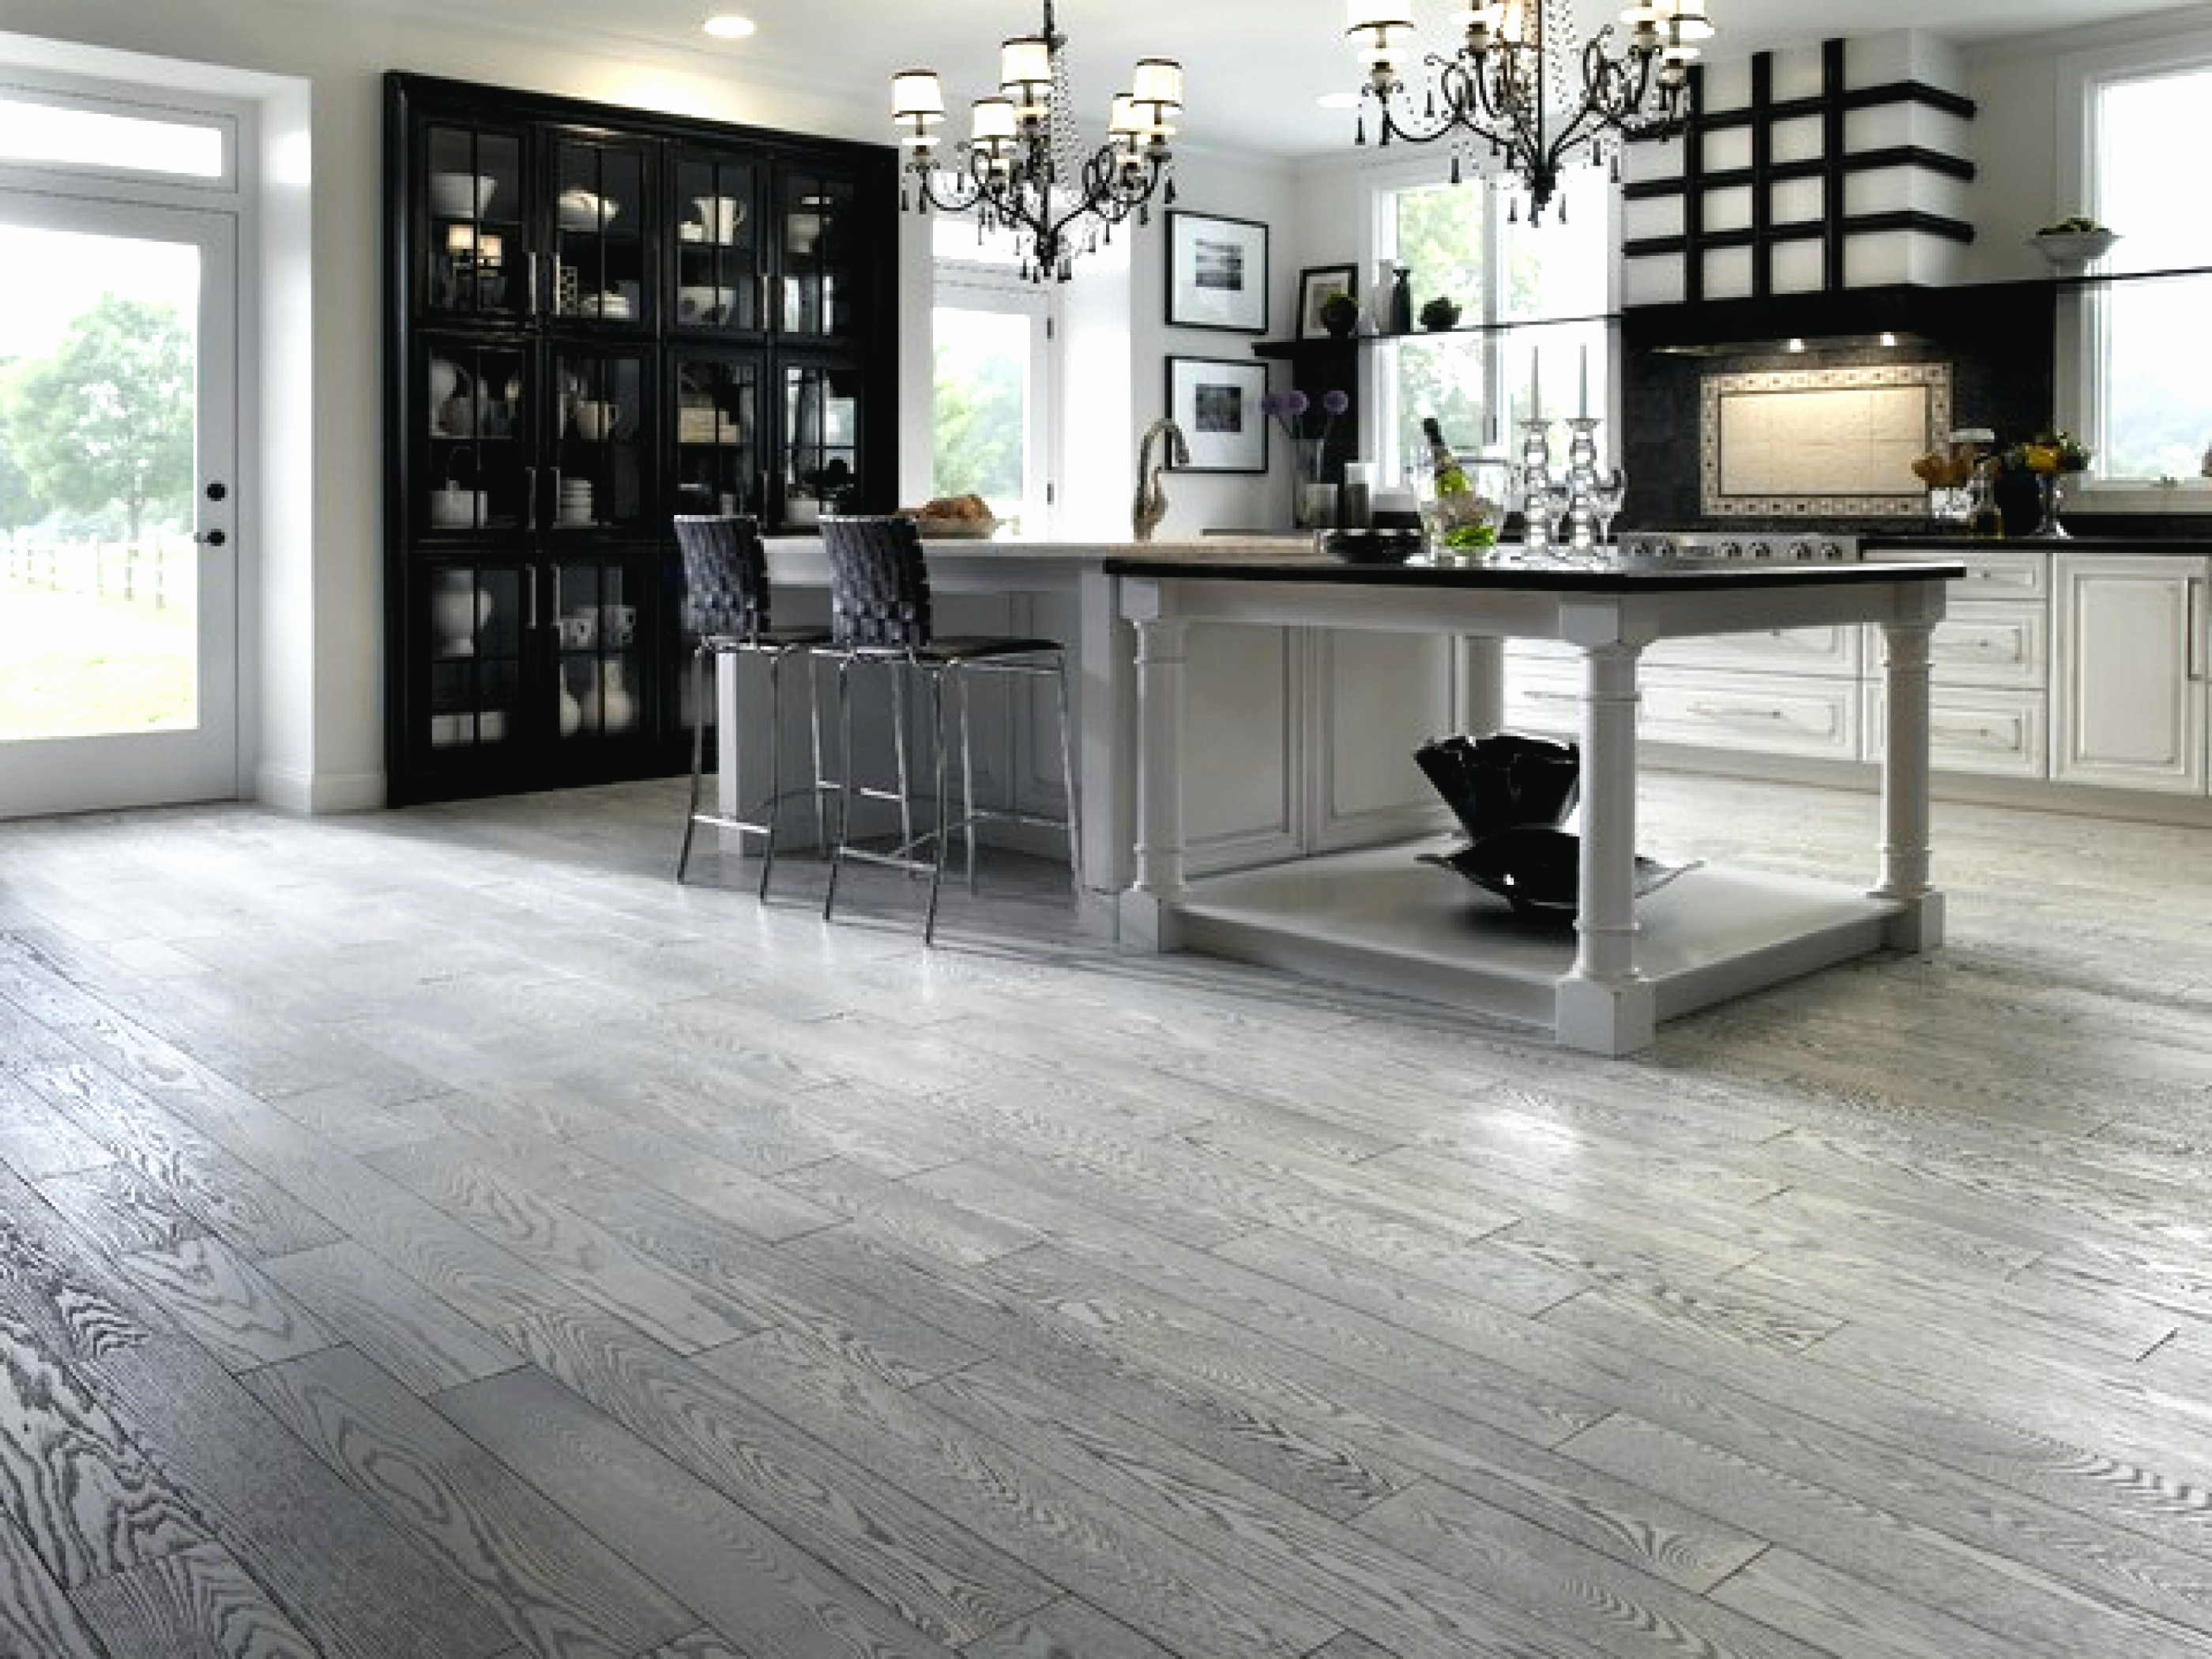 22 attractive Hardwood Floor Installers Cincinnati 2024 free download hardwood floor installers cincinnati of floors to your home reviews our coastal farmhouse weathered gray within floors to your home reviews 50 lovely dark grey hardwood floors graphics 50 s